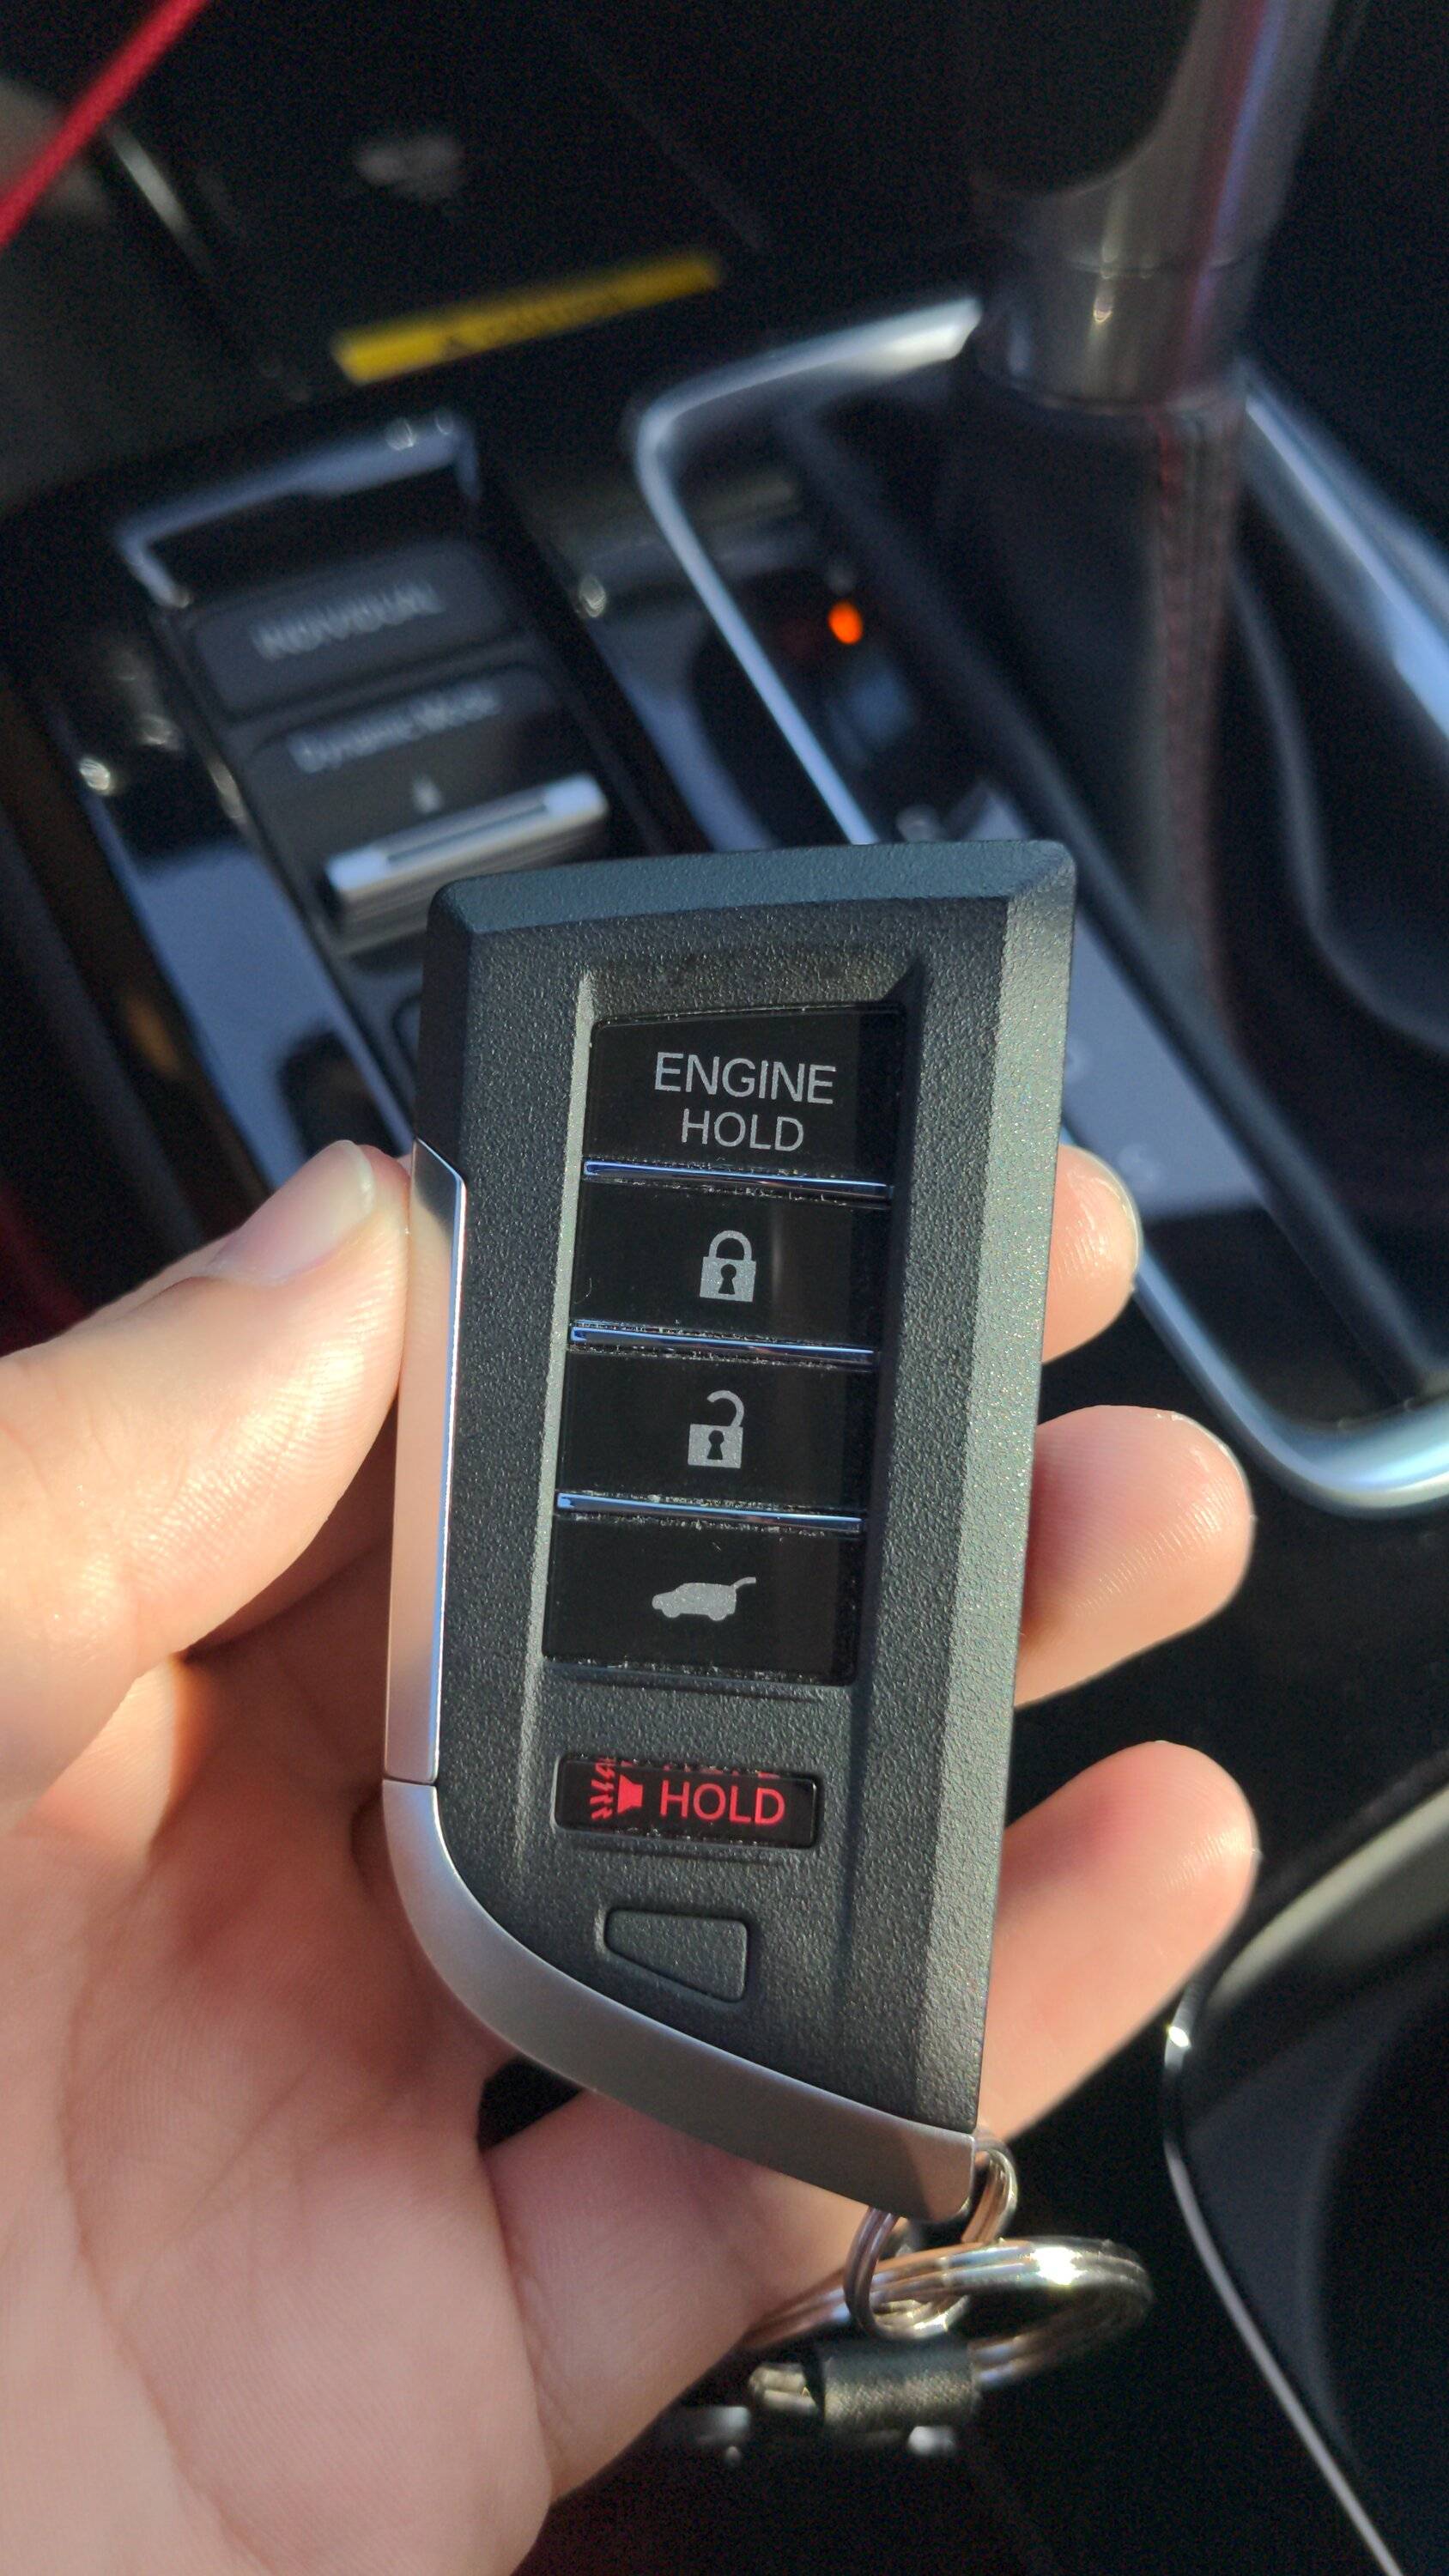 Trunk release button on key fob? Doesn't seem to do anything